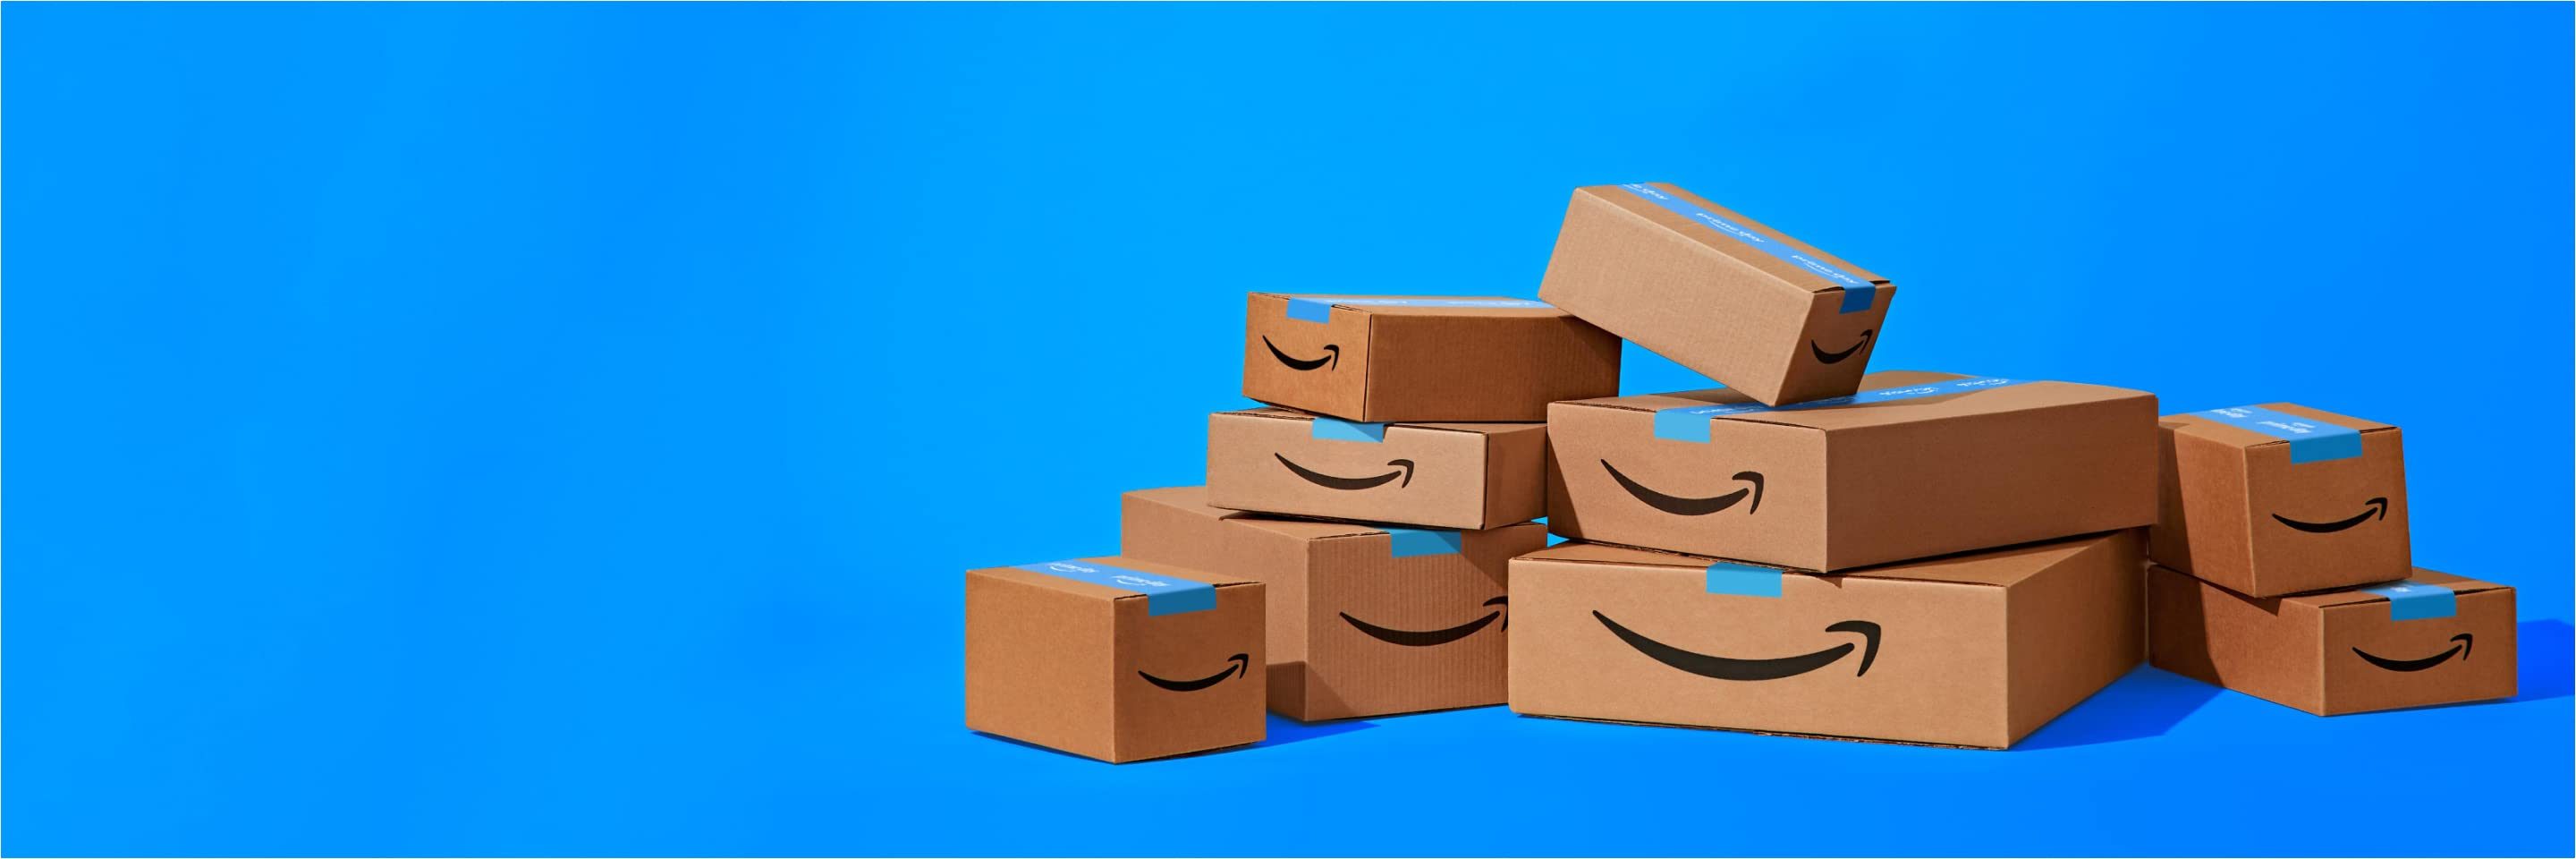 Prime Day boxes